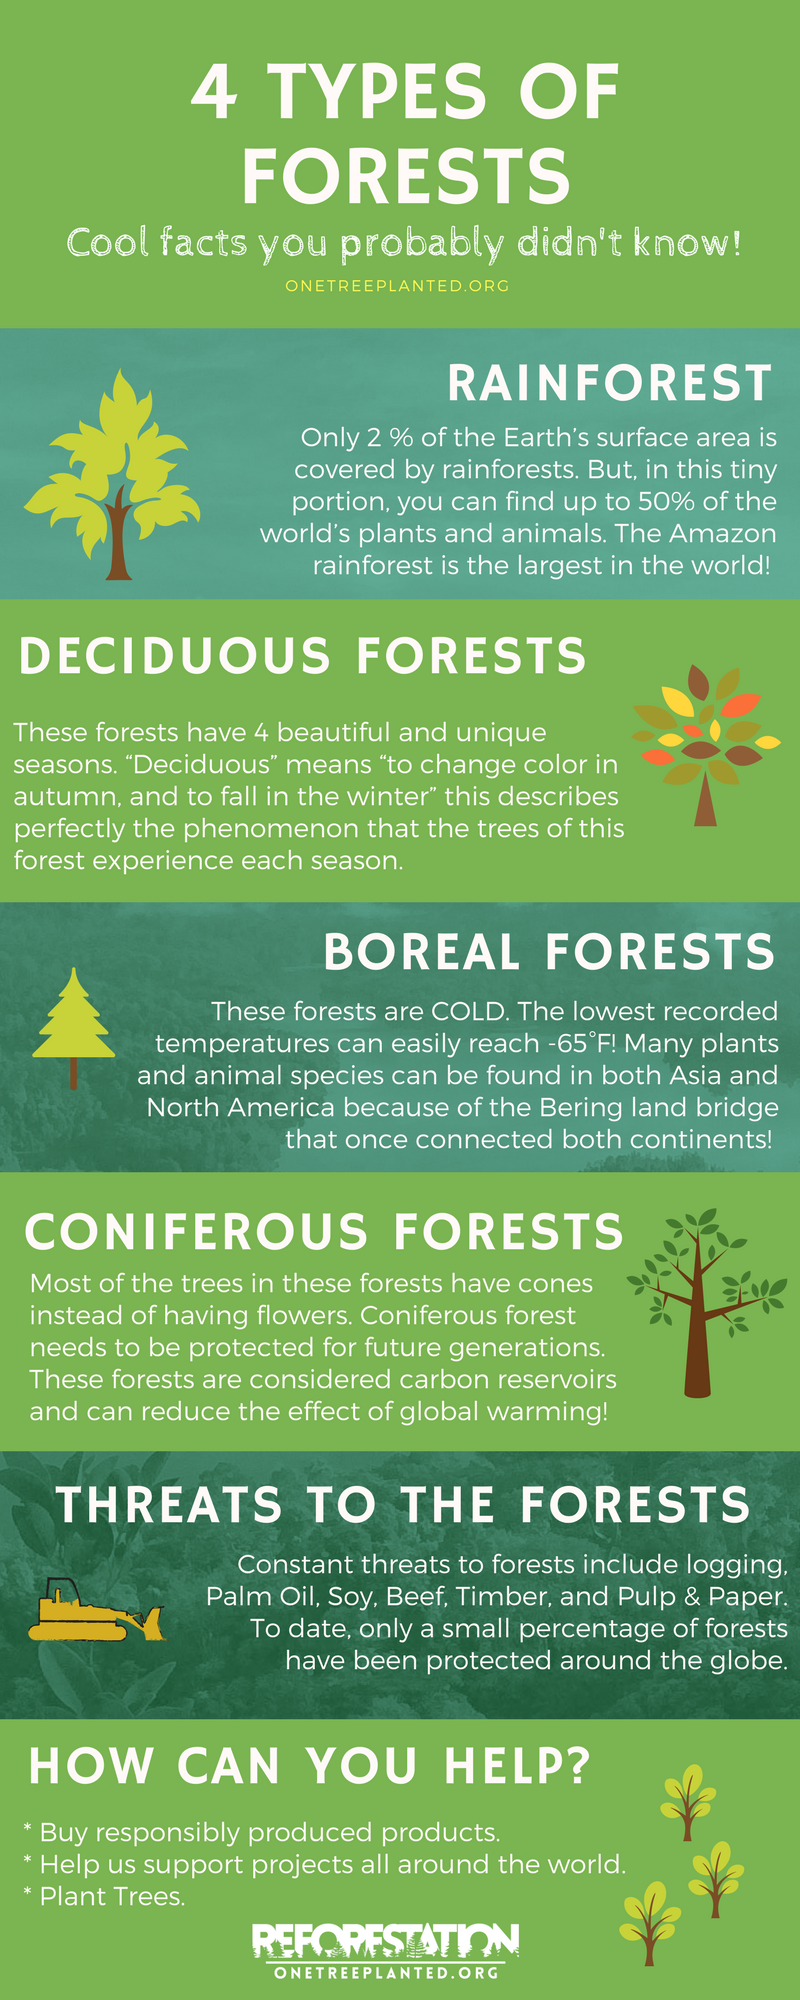 7 Of The Most Breathtaking Forests In The World Trave - vrogue.co